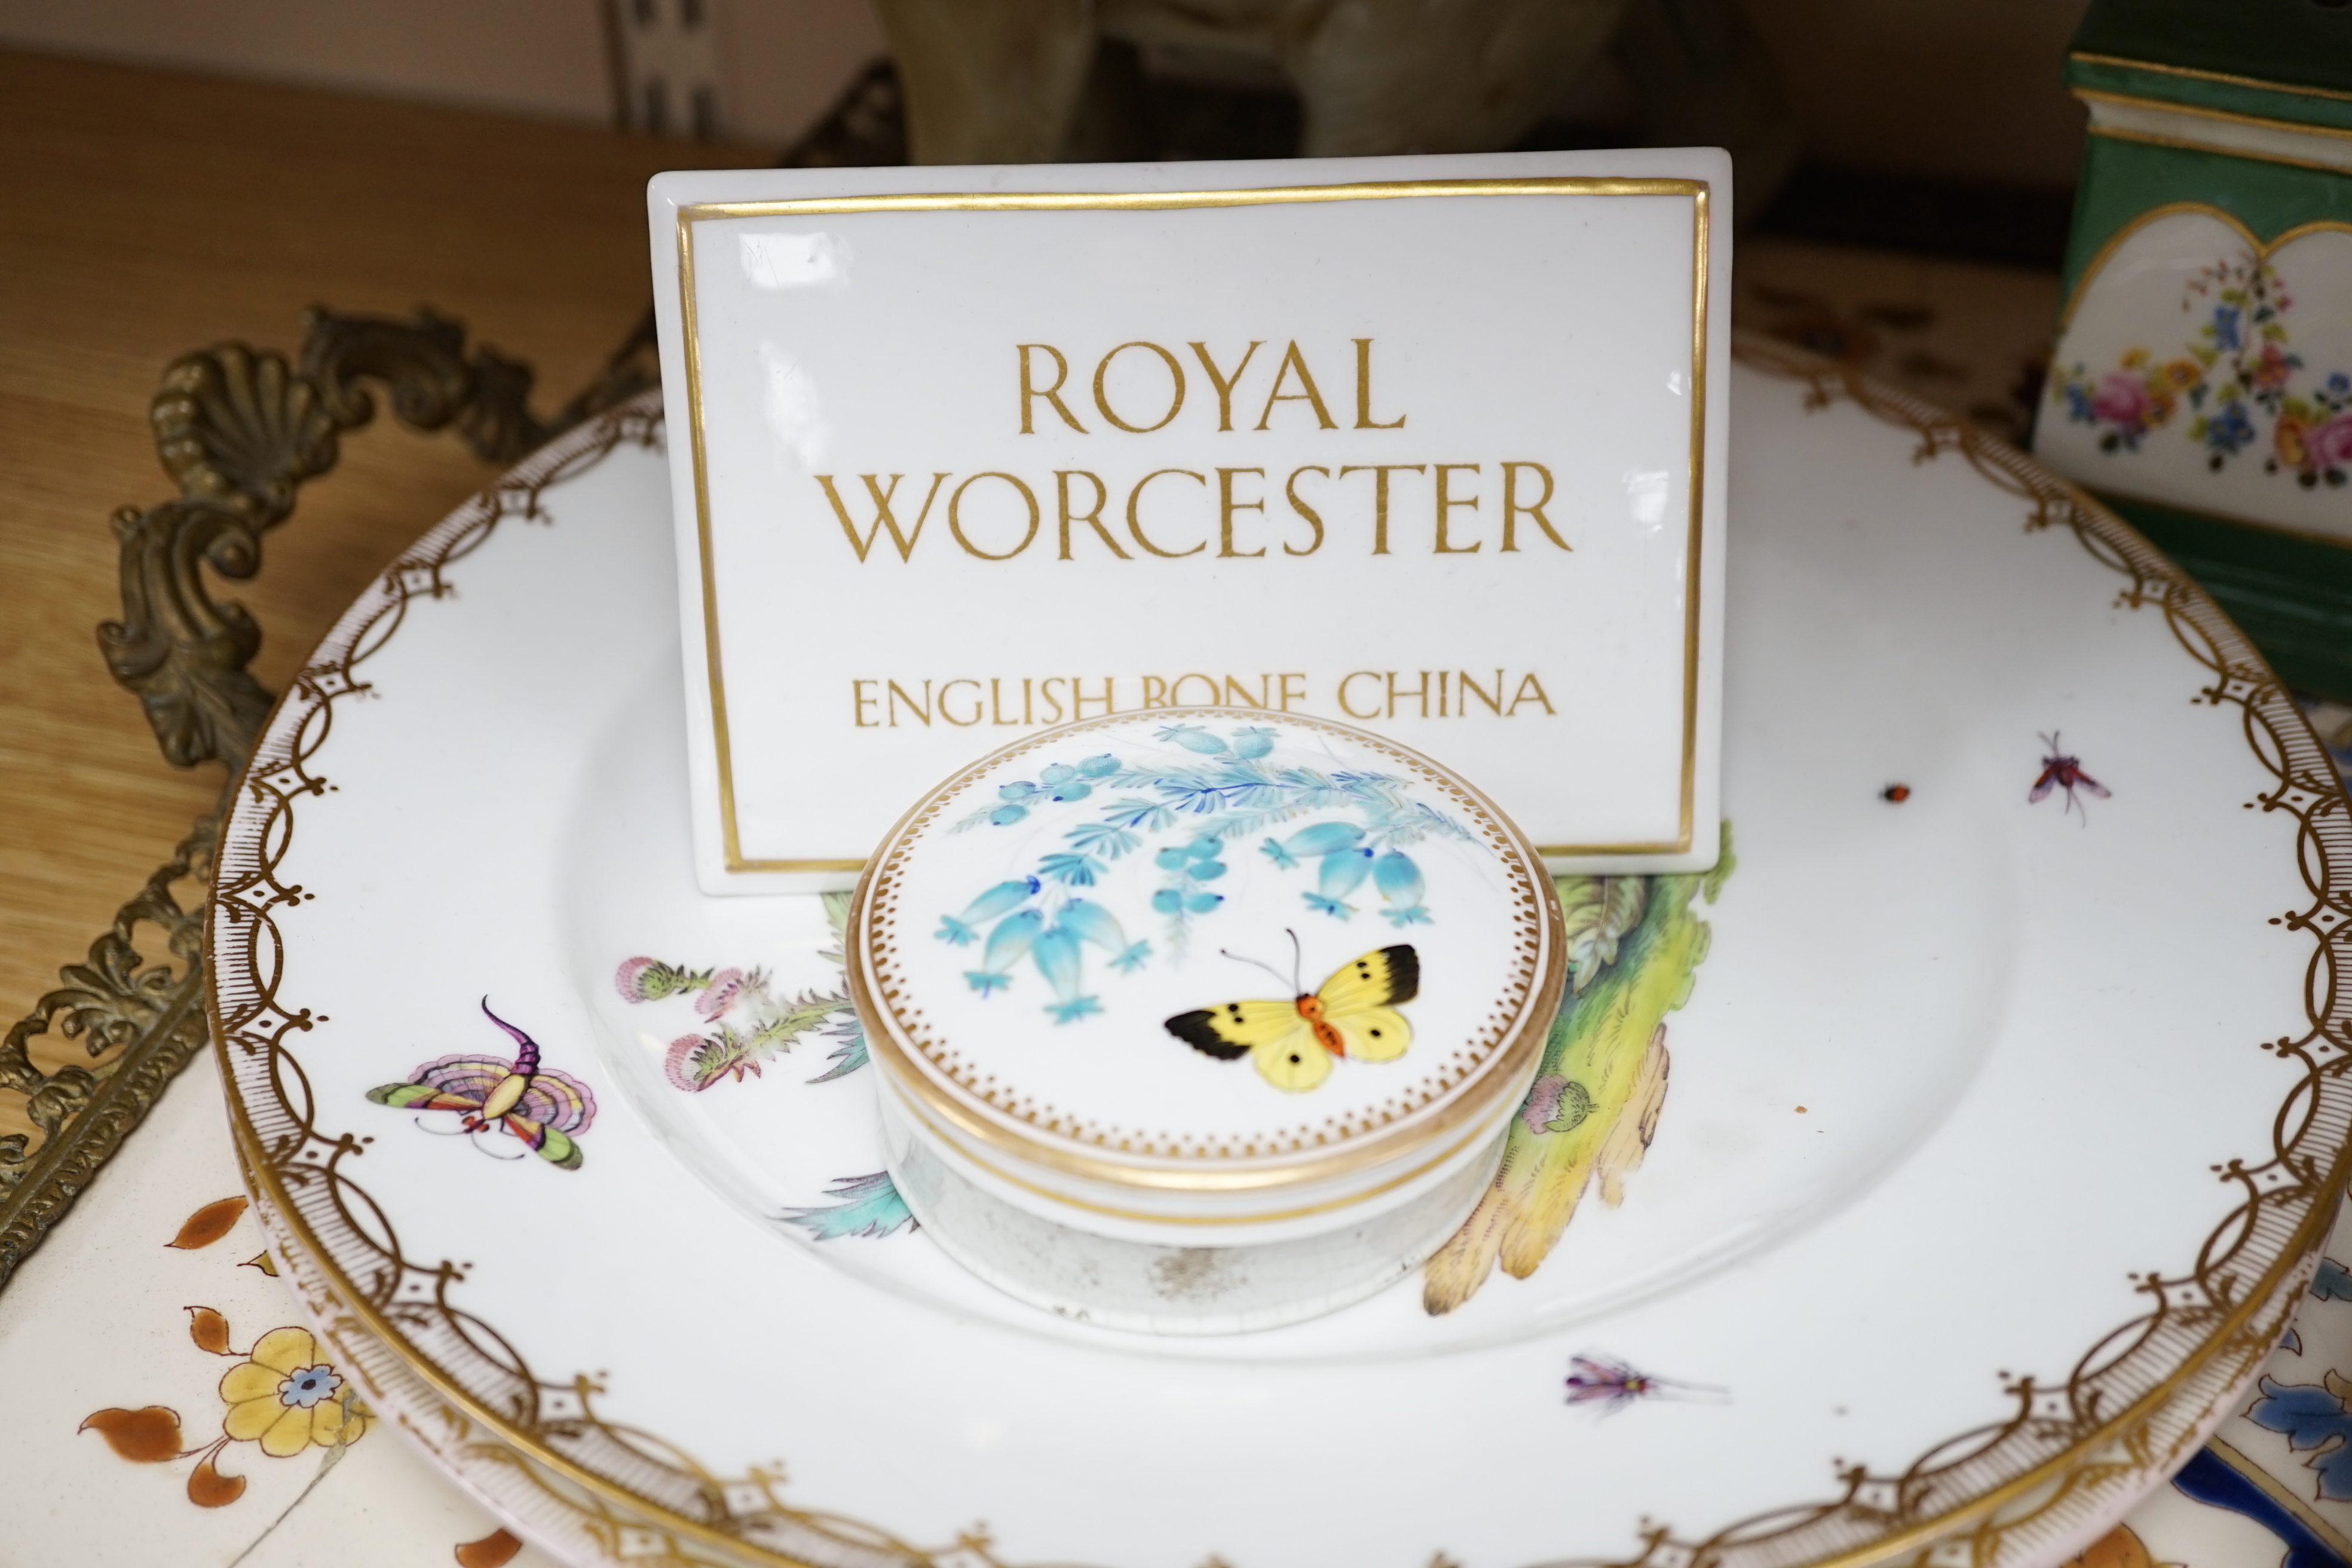 An Austrian Zsolnay type tray together with mixed English and Continental china including Royal Worcester vase, KPM figures and Moore centrepiece, largest 63cm wide